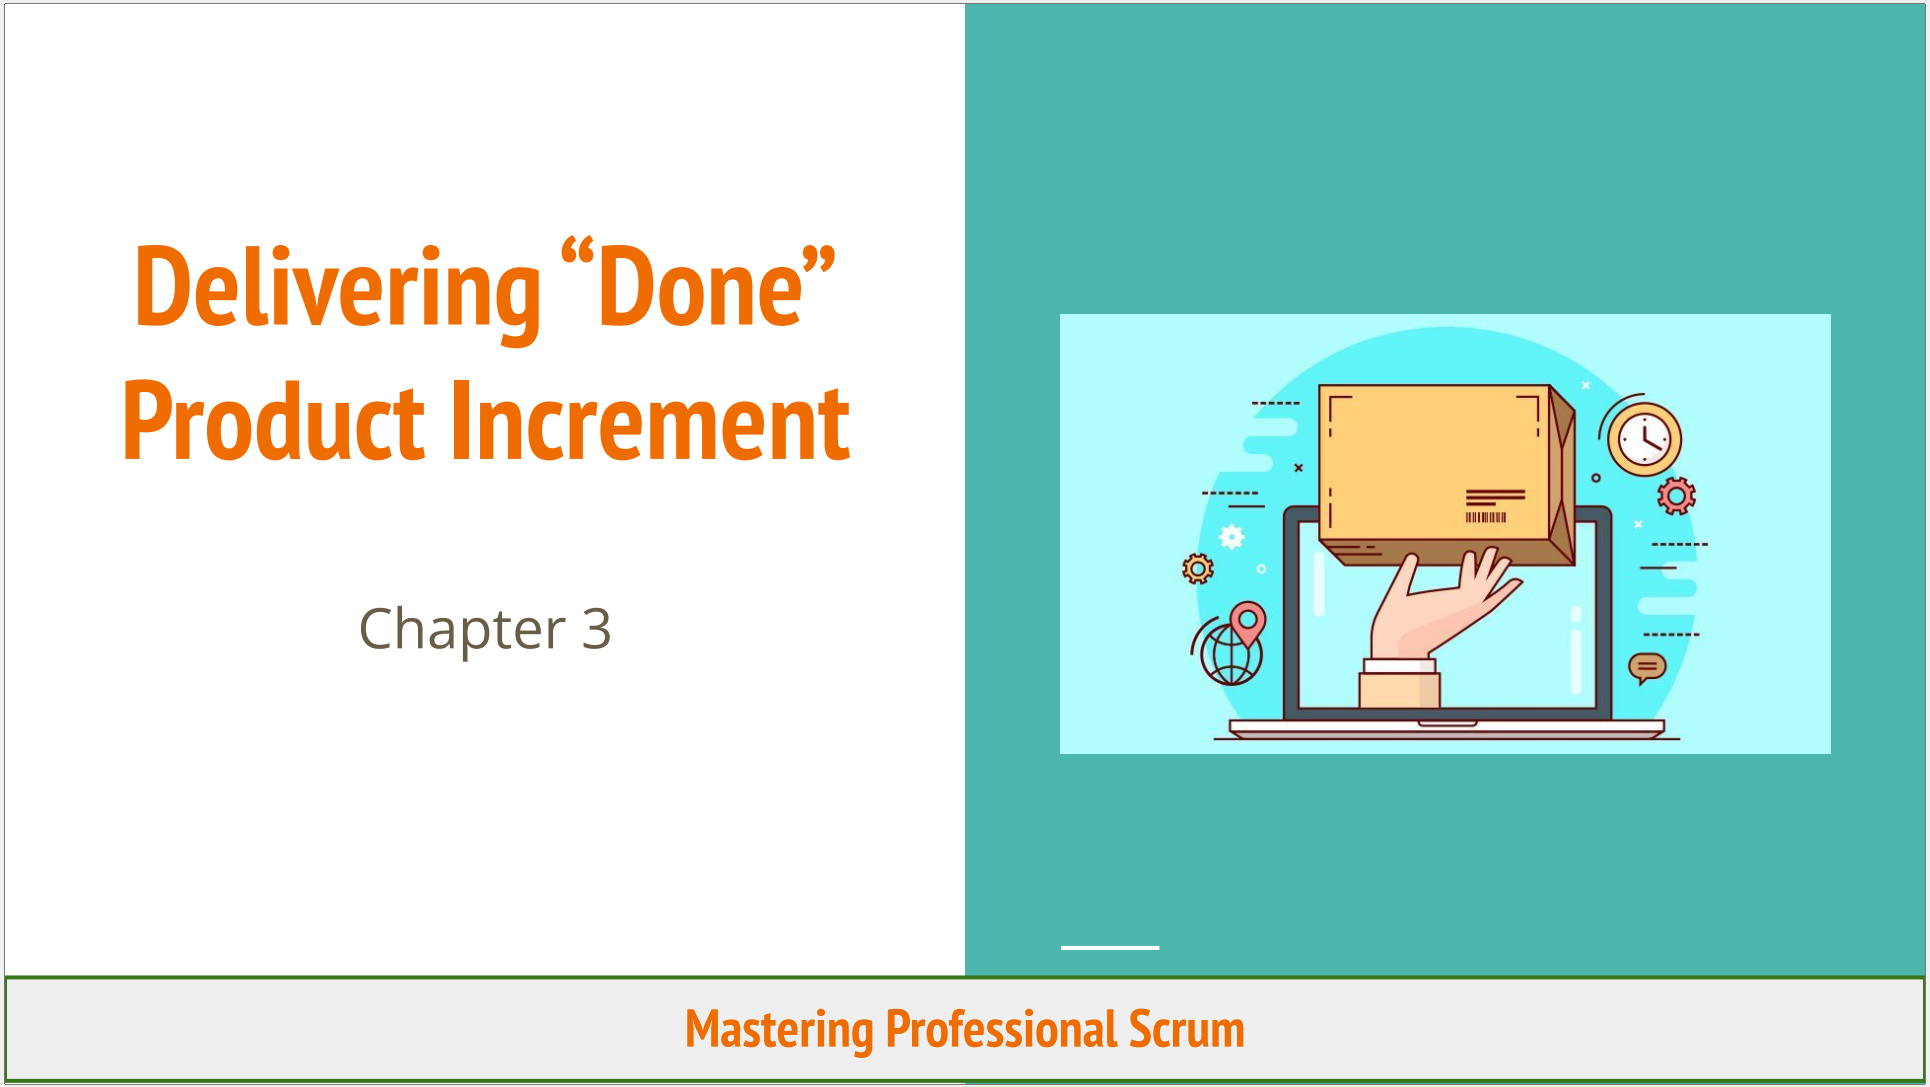 Delivering “Done” Product Increment